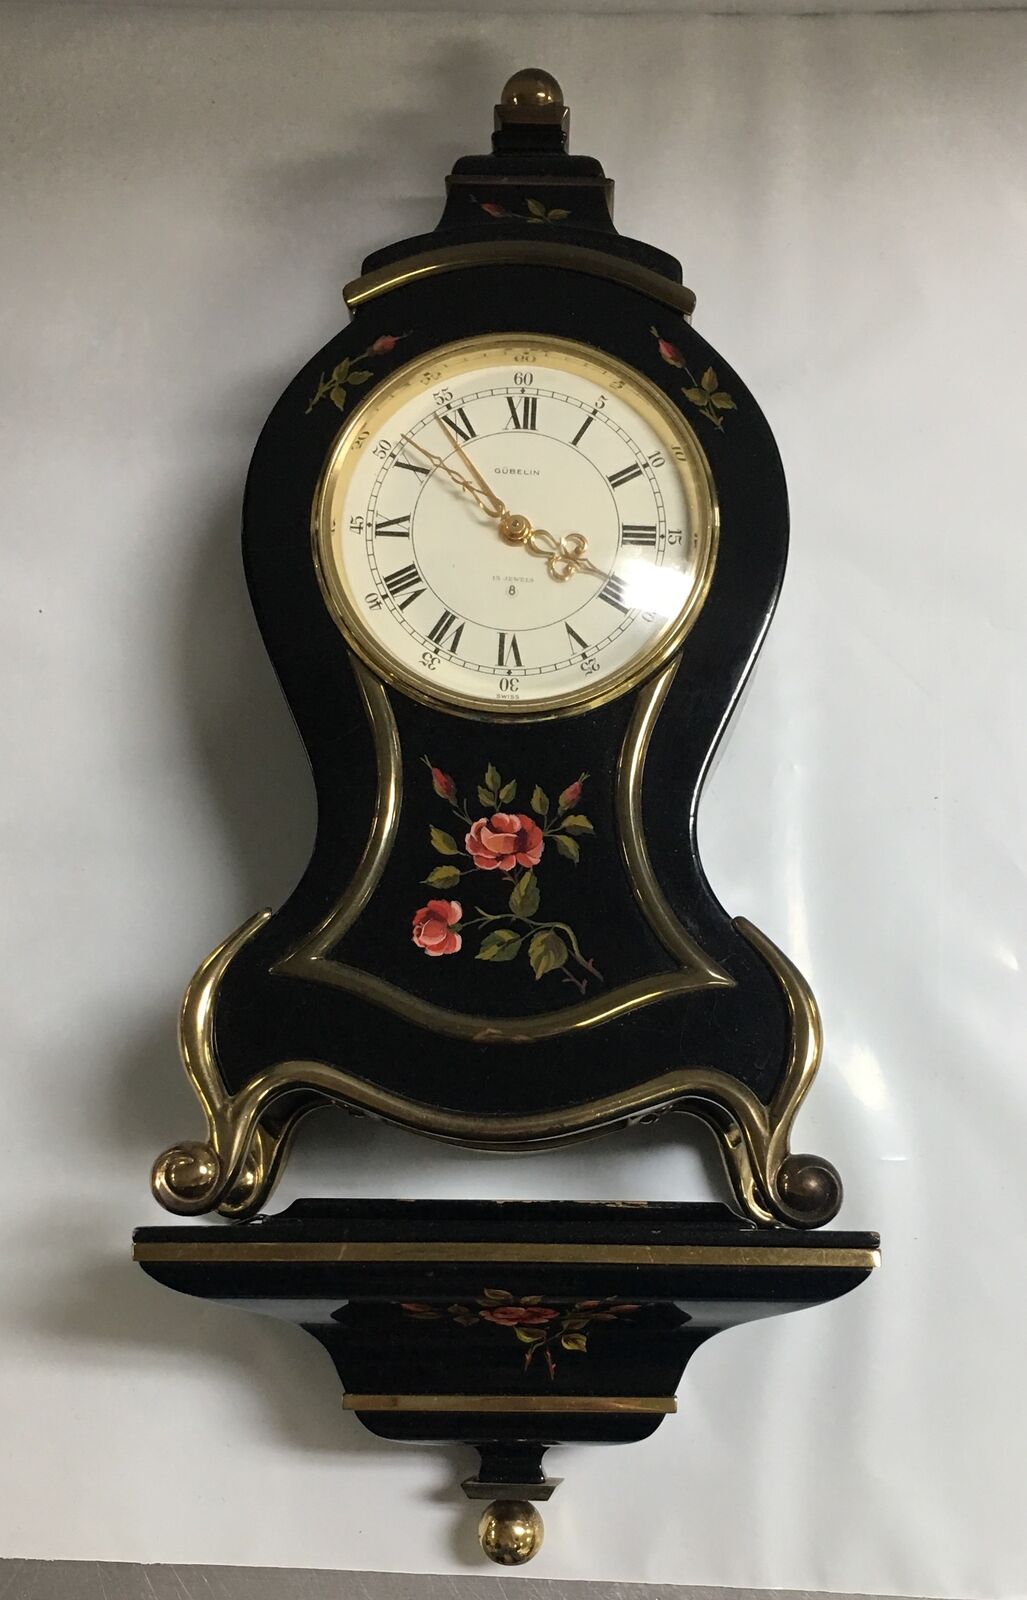 Antique GUBELIN Swiss Floral Design 8 Day Wall Clock with Shelf